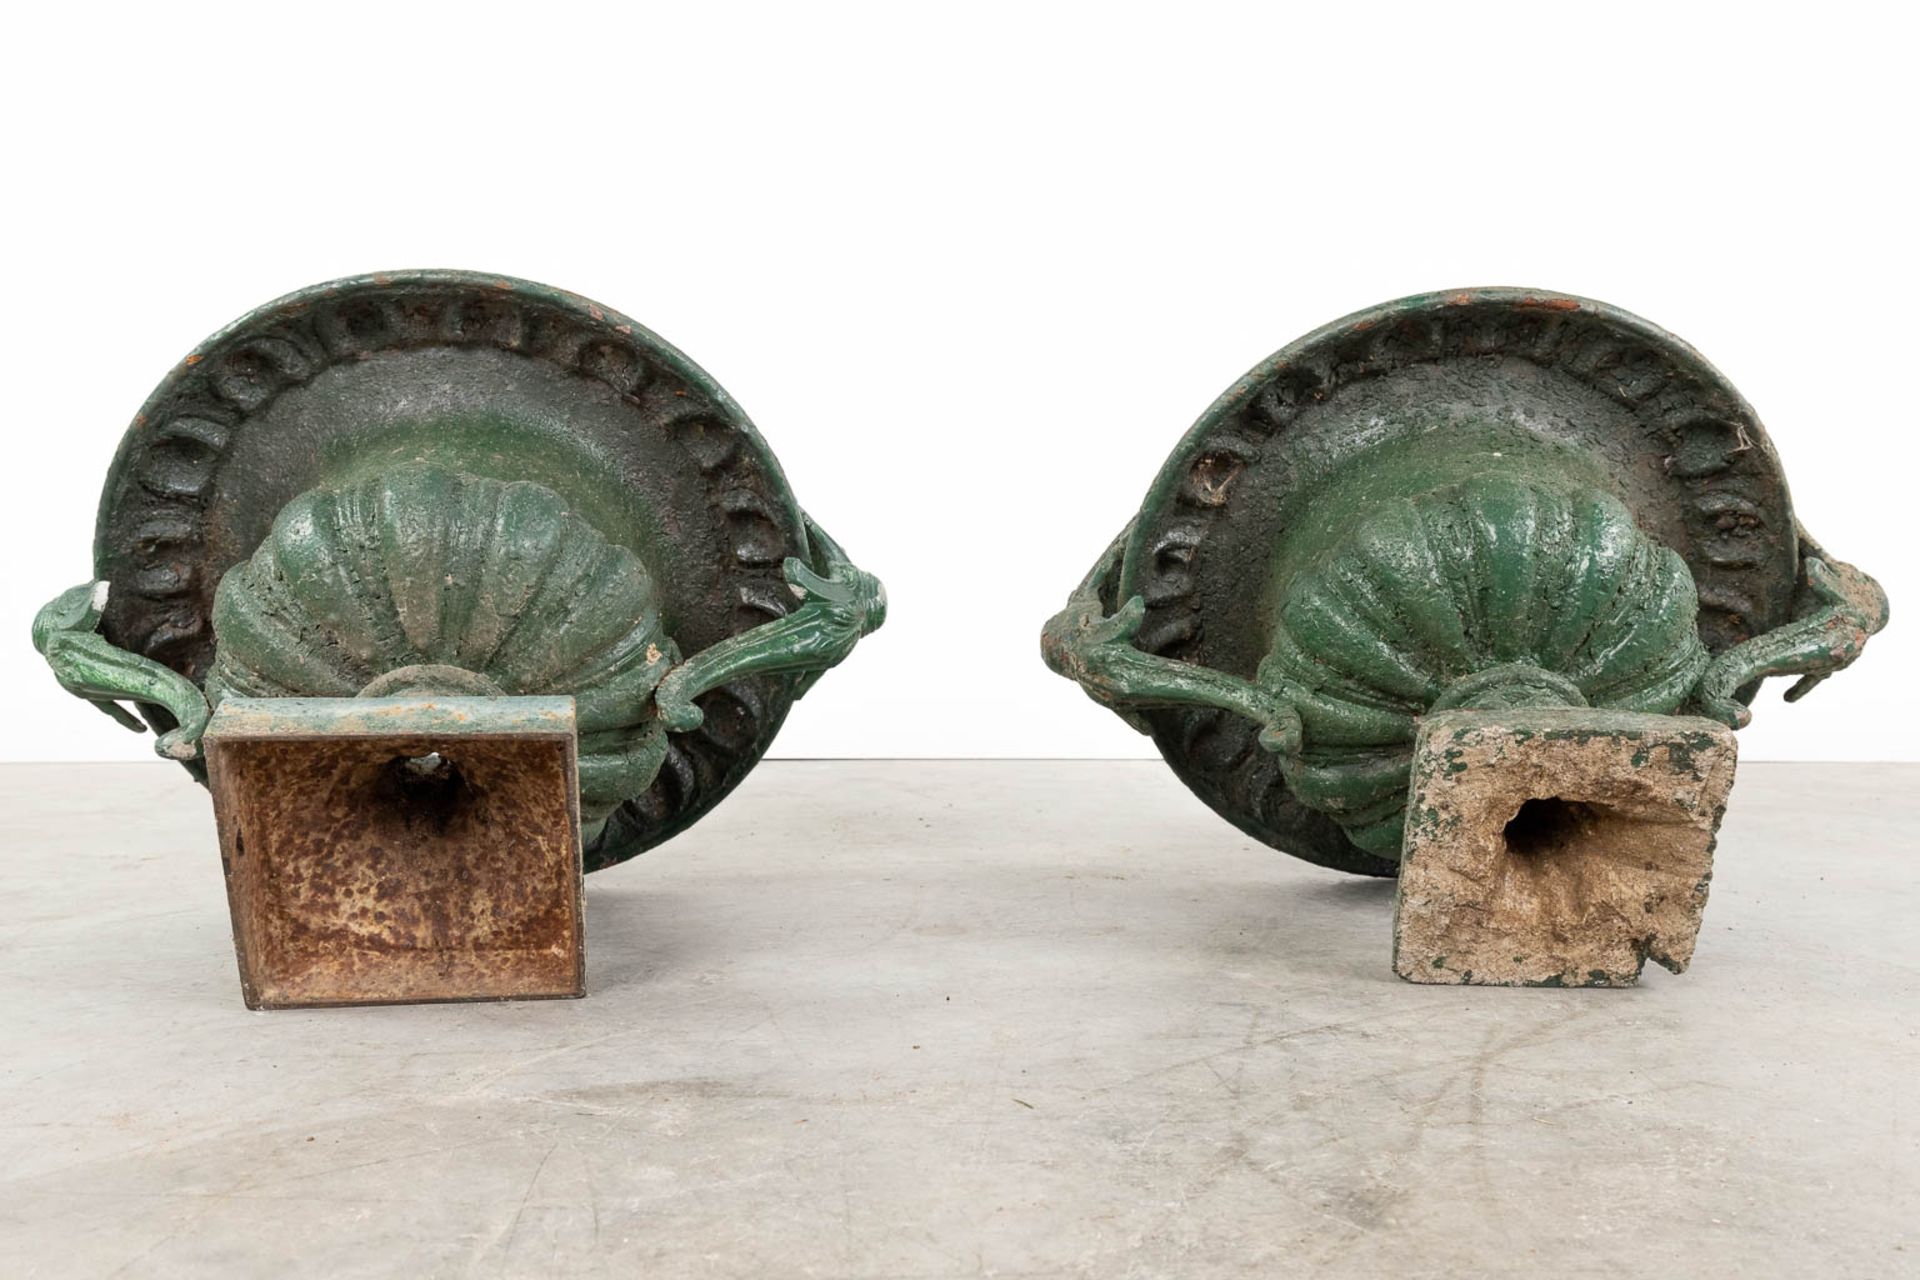 A collection of 3 garden vases, made of cast iron. (L:33 x W:68 x H:34 cm) - Image 8 of 15